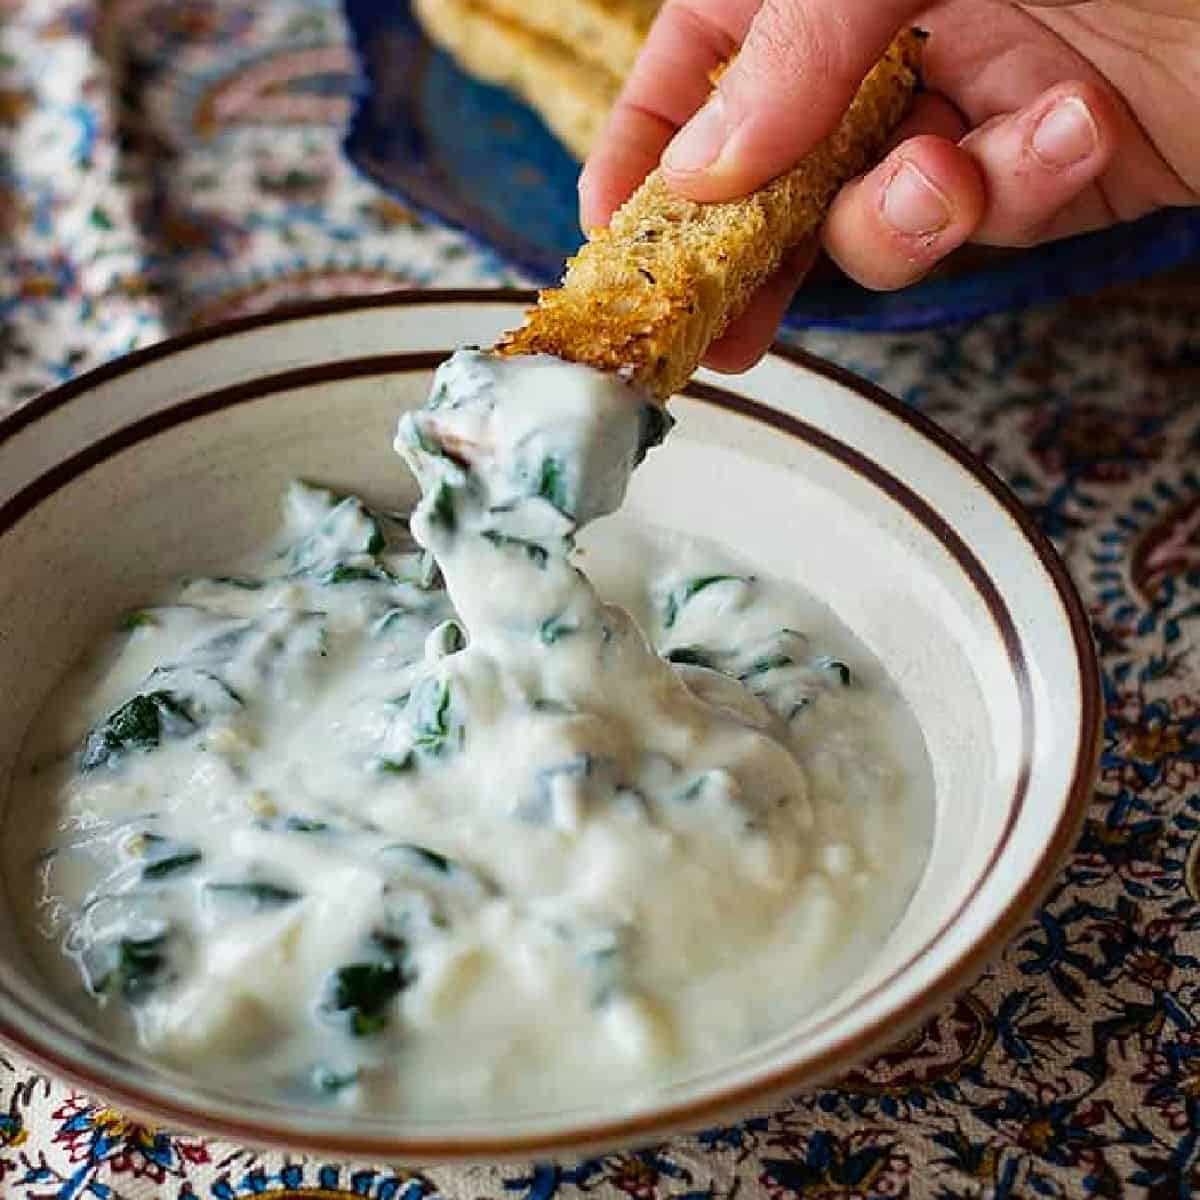 Borani Esfenaj is a classic Persian spinach yogurt dip that's usually served with bread. With a lot of spinach and garlic, this delicious dip is something you don't want to miss!
